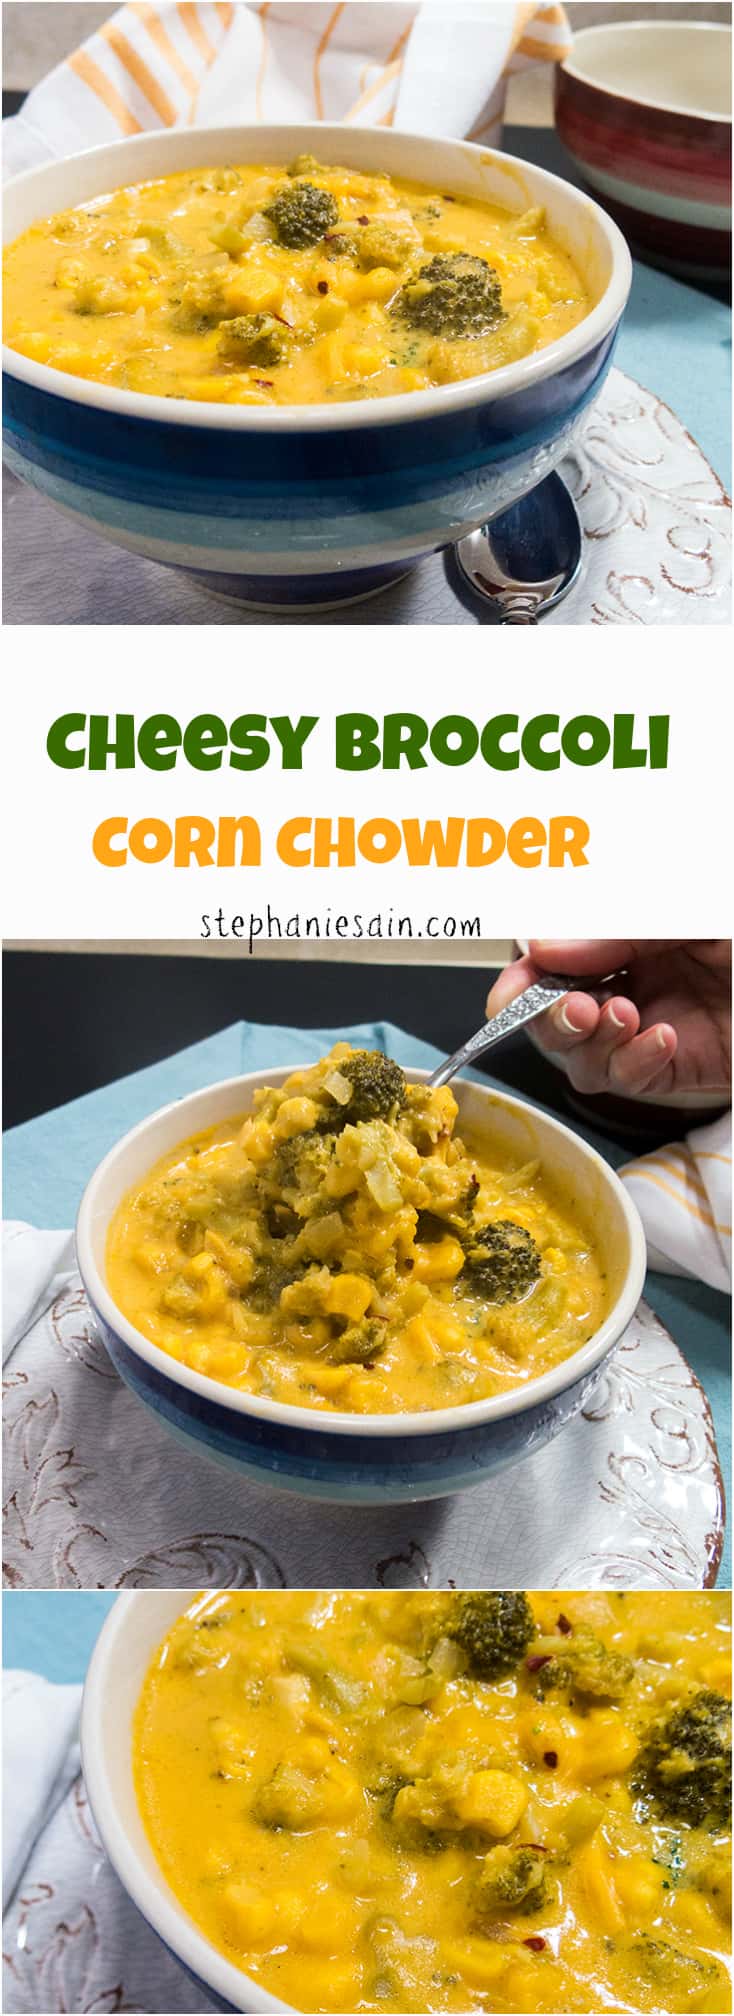 Cheesy Broccoli Corn Chowder is an easy to prepare healthy chowder packed with lots of broccoli and corn. Vegetarian and Gluten Free.